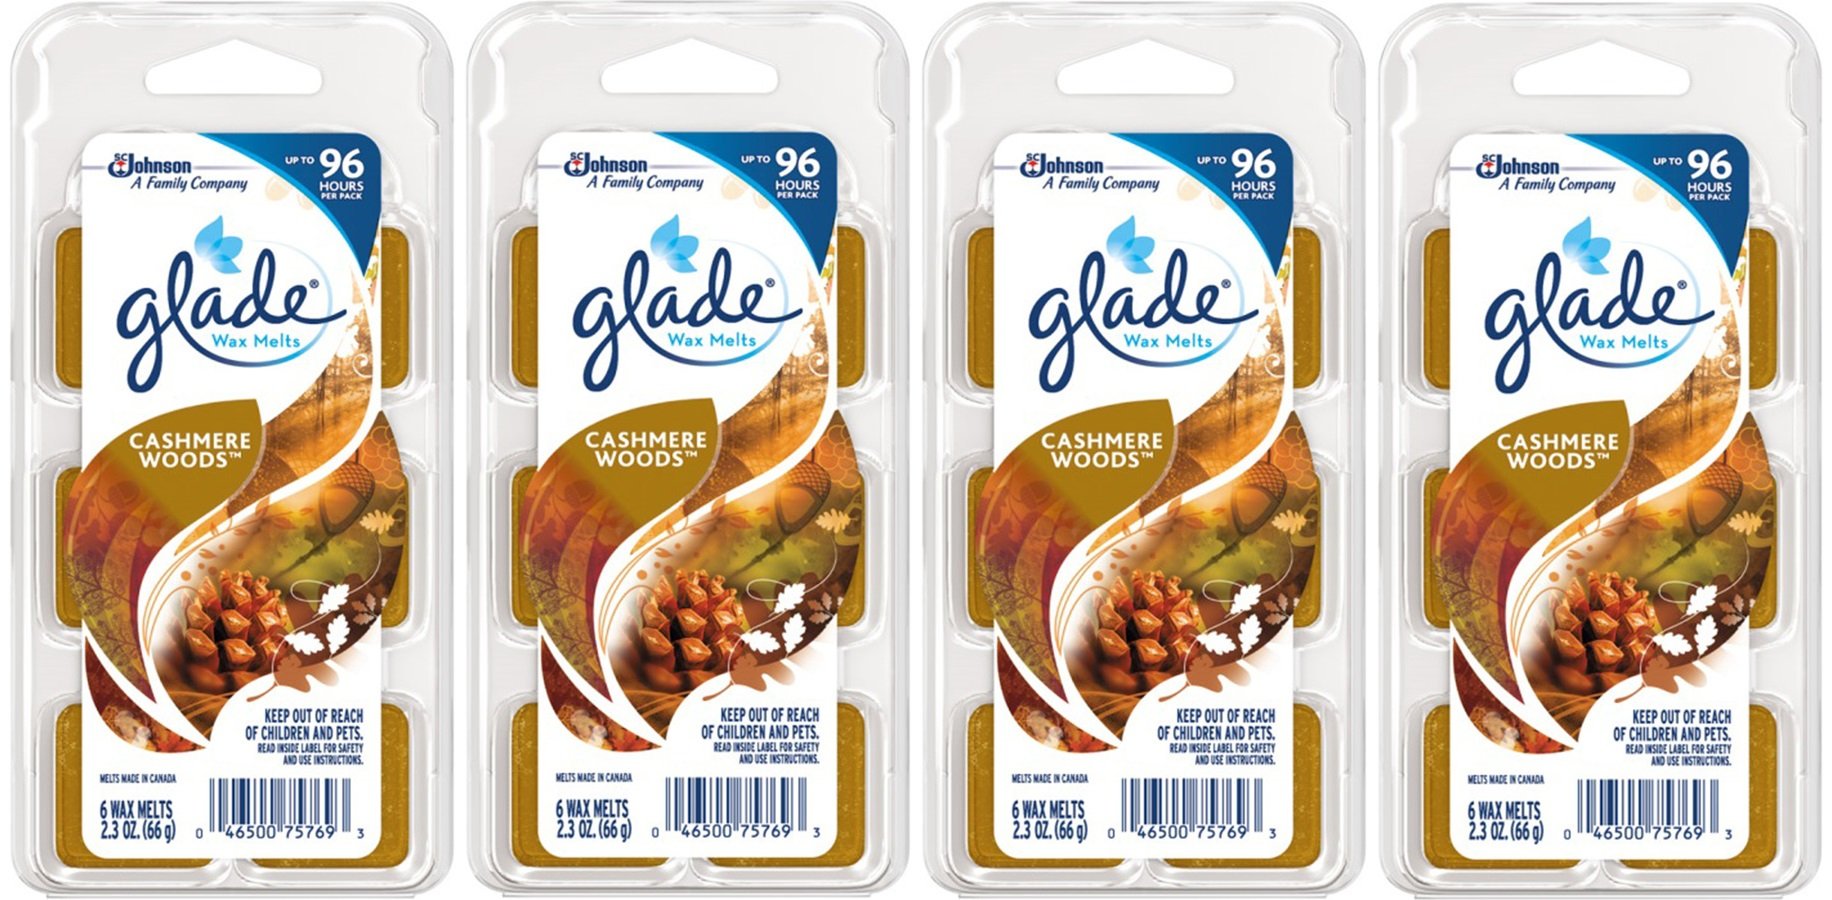 Glade Wax Melts - Cashmere Woods - 6 Count - Net Wt. 2.3 OZ (66 g) Each - Pack of 4 (24 Melts Total)